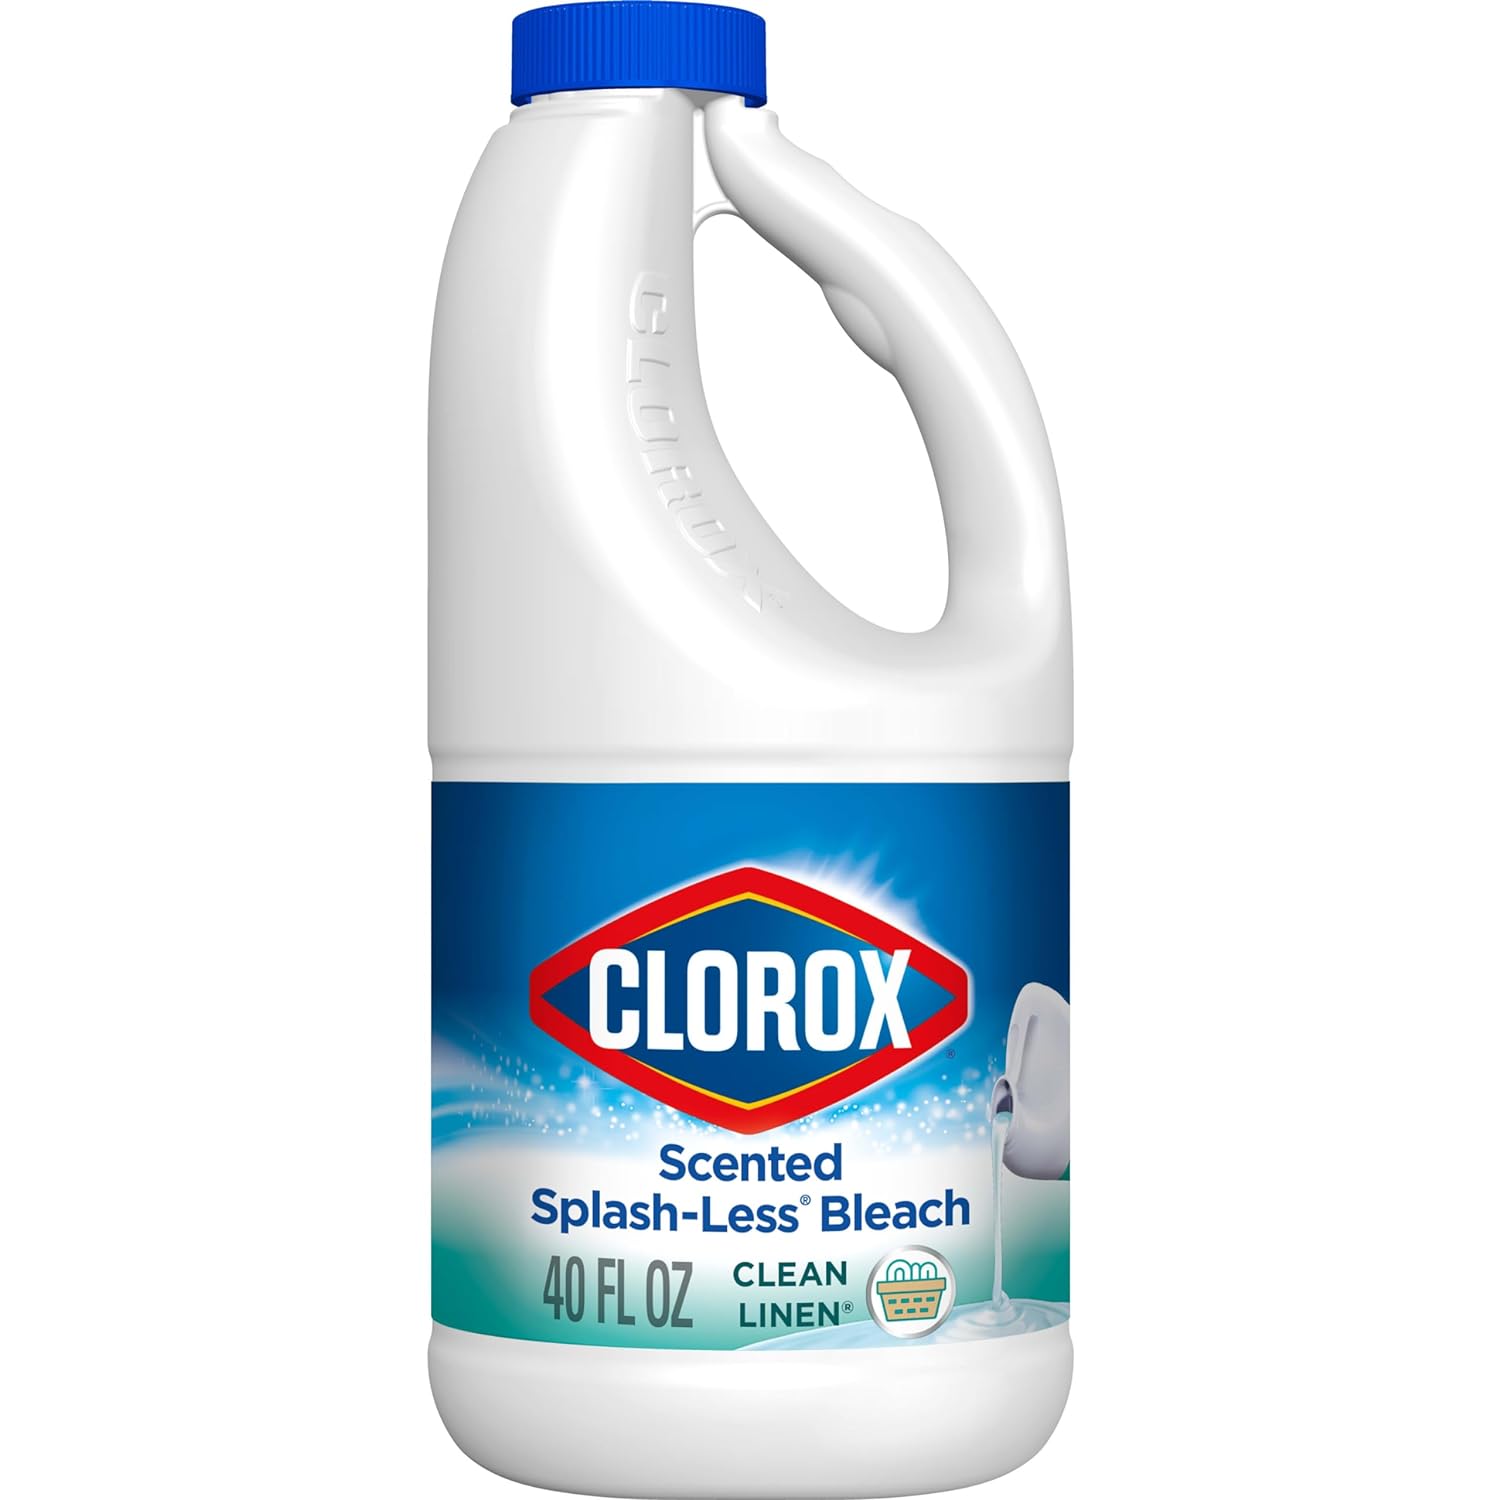 Clorox Splash-Less Bleach, Concentrated Formula, Clean Linen, 40 Ounce Bottle (Package May Vary)